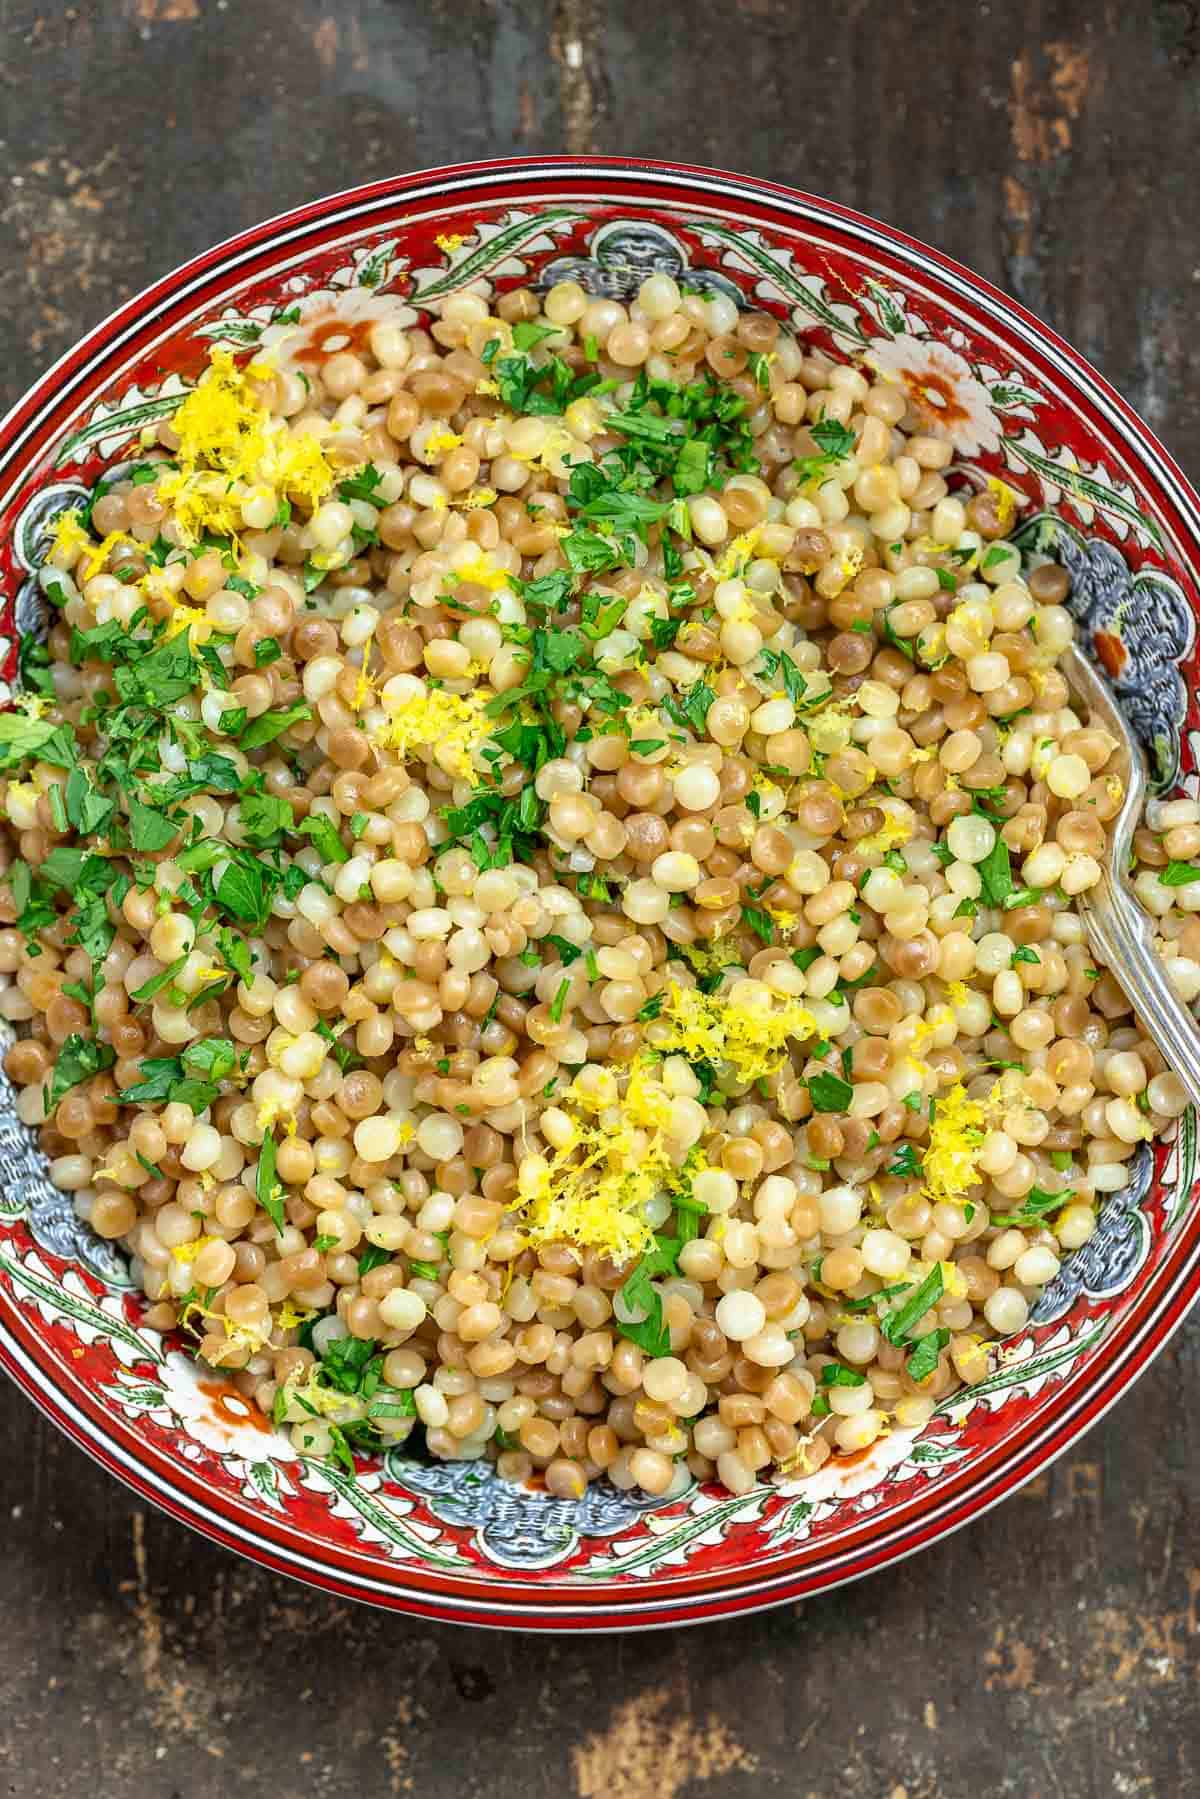 Toasted and cooked Israeli couscous in a patterned bowl with fresh herbs and lemon zest sprinkled on top.